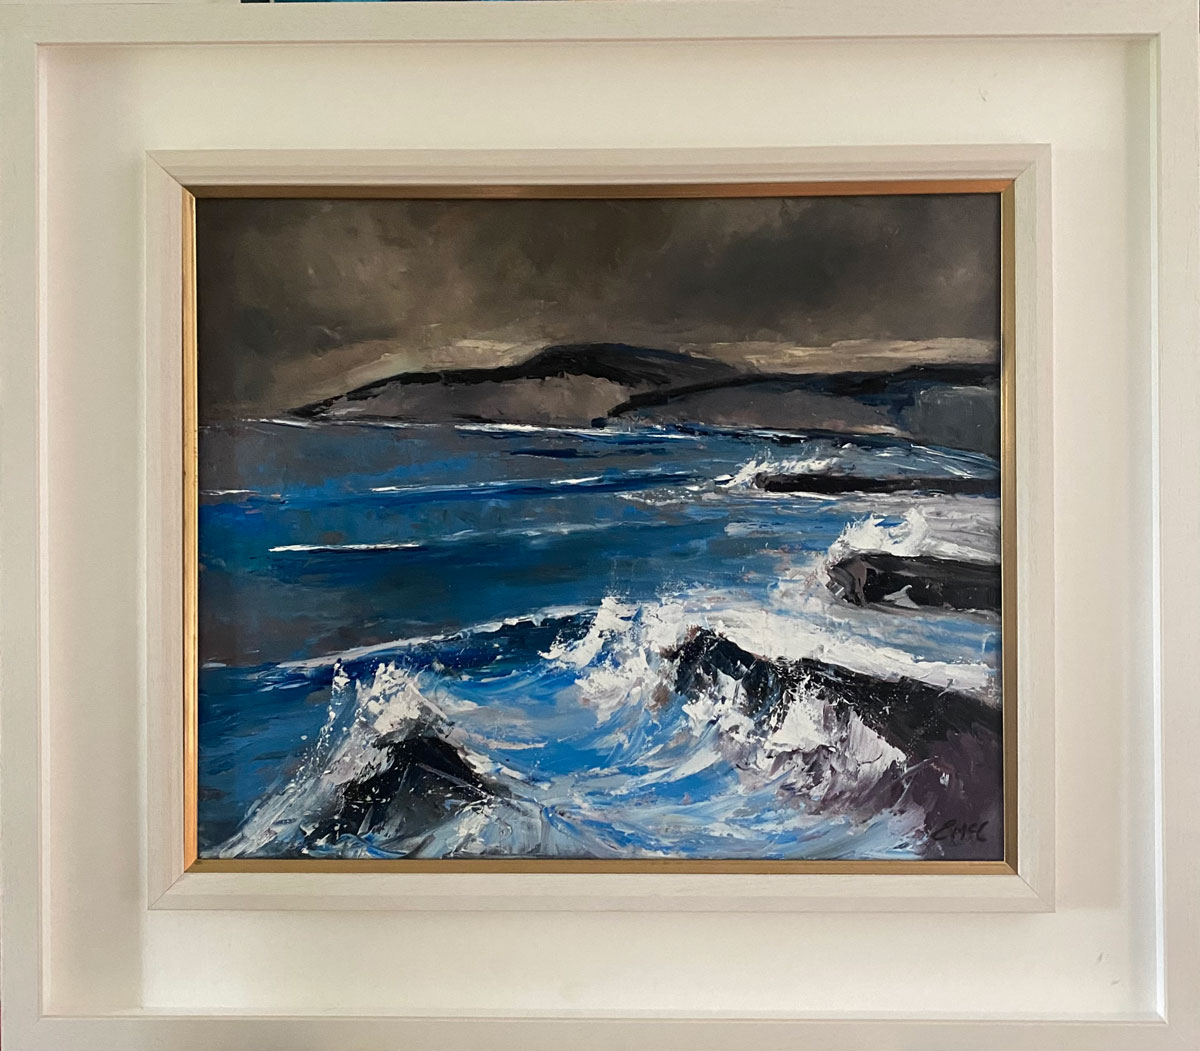 The Waves Crashed Along The Wil Atlantic Way - Original Seascape Oil Painting